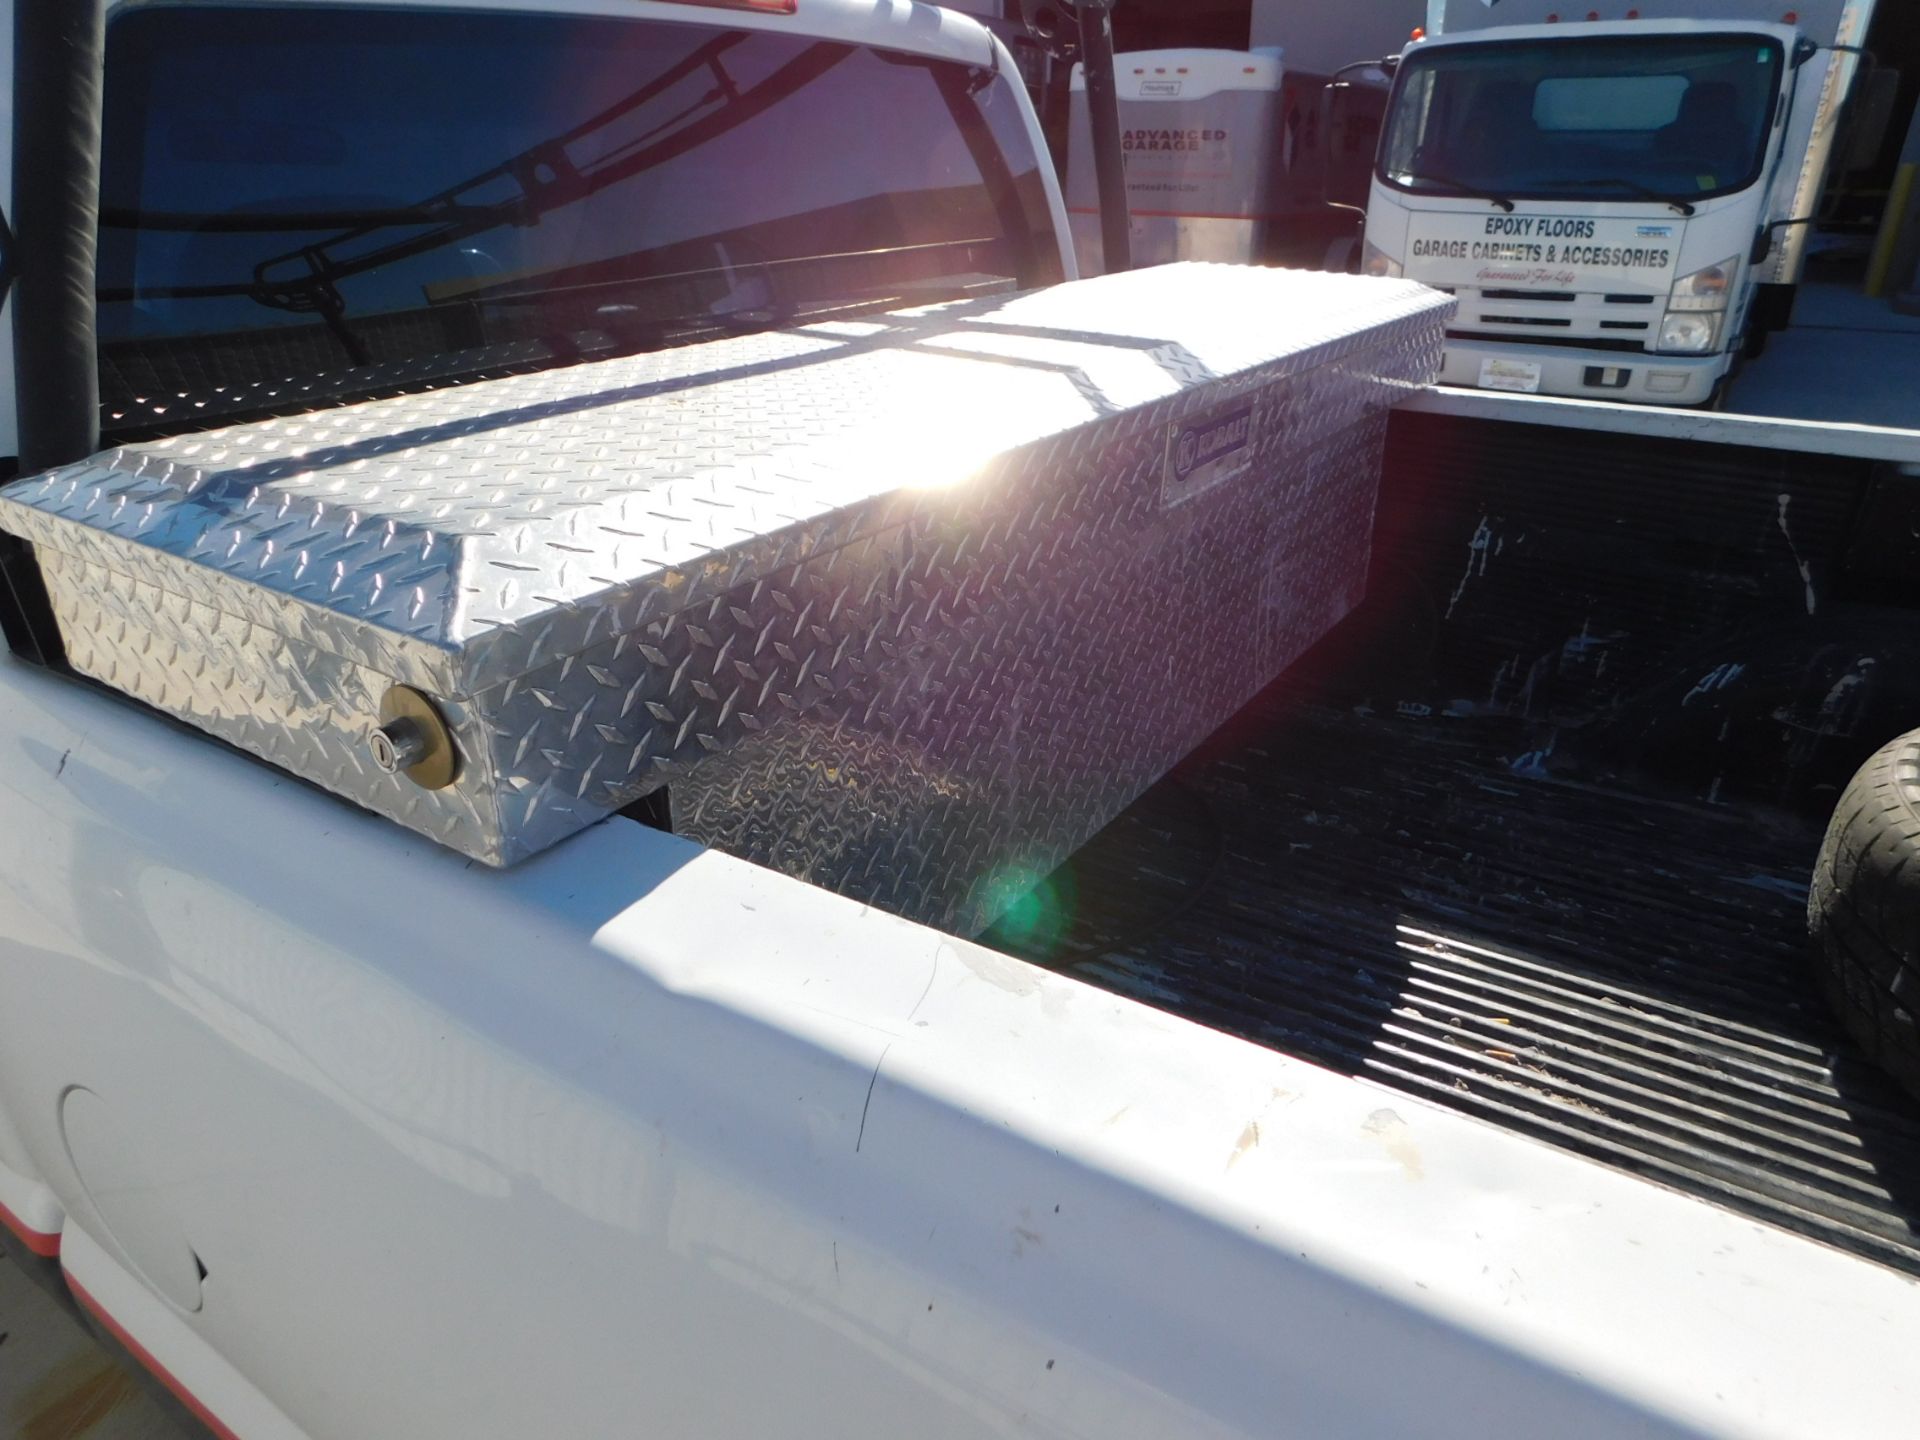 Silverado Pickup with Tool Rack and Tool Box, 88,834 Miles Showing, VIN 1GCEC14T91E251093, - Image 4 of 7